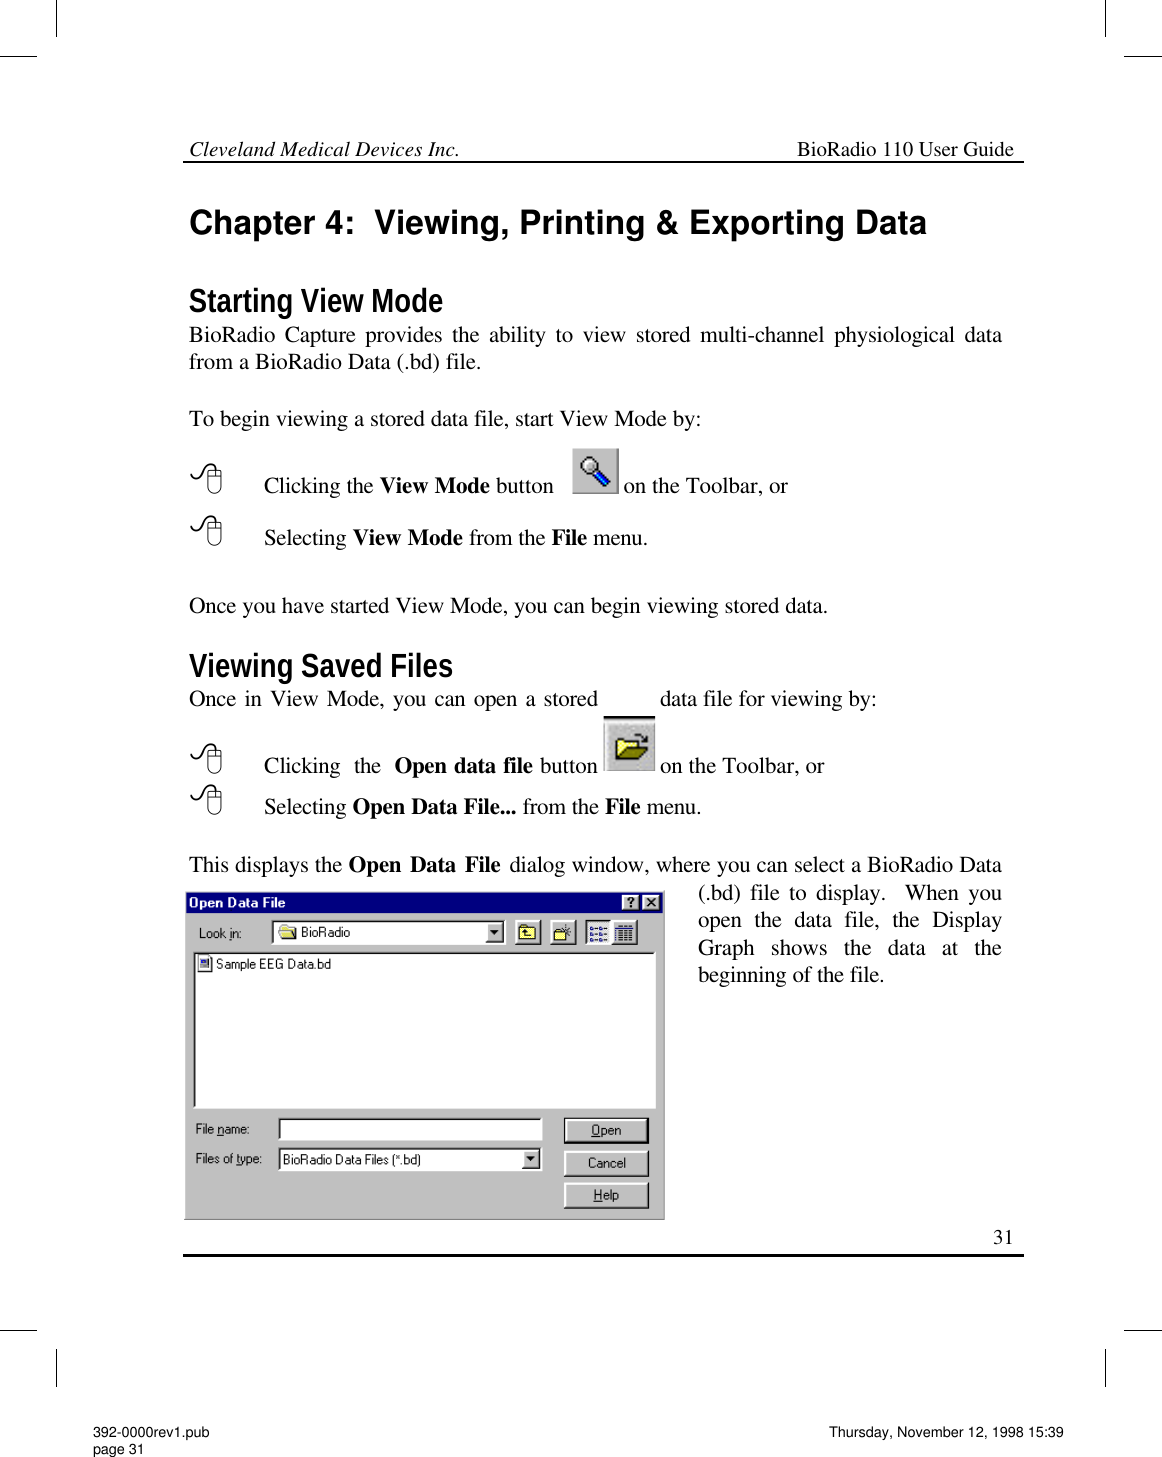 Cleveland Medical Devices Inc.                                                             BioRadio 110 User Guide                                                                                                                                                   31 Chapter 4:  Viewing, Printing &amp; Exporting Data  Starting View Mode BioRadio Capture provides the ability to view stored multi-channel physiological data from a BioRadio Data (.bd) file.   To begin viewing a stored data file, start View Mode by:  8 Clicking the View Mode button            on the Toolbar, or 8       Selecting View Mode from the File menu.  Once you have started View Mode, you can begin viewing stored data.  Viewing Saved Files Once in View Mode, you can open a stored data file for viewing by:  8      Clicking the Open data file button  on the Toolbar, or  8       Selecting Open Data File... from the File menu.    This displays the Open Data File dialog window, where you can select a BioRadio Data (.bd) file to display.  When you open the data file, the Display Graph shows the data at the beginning of the file.   392-0000rev1.pub page 31 Thursday, November 12, 1998 15:39 